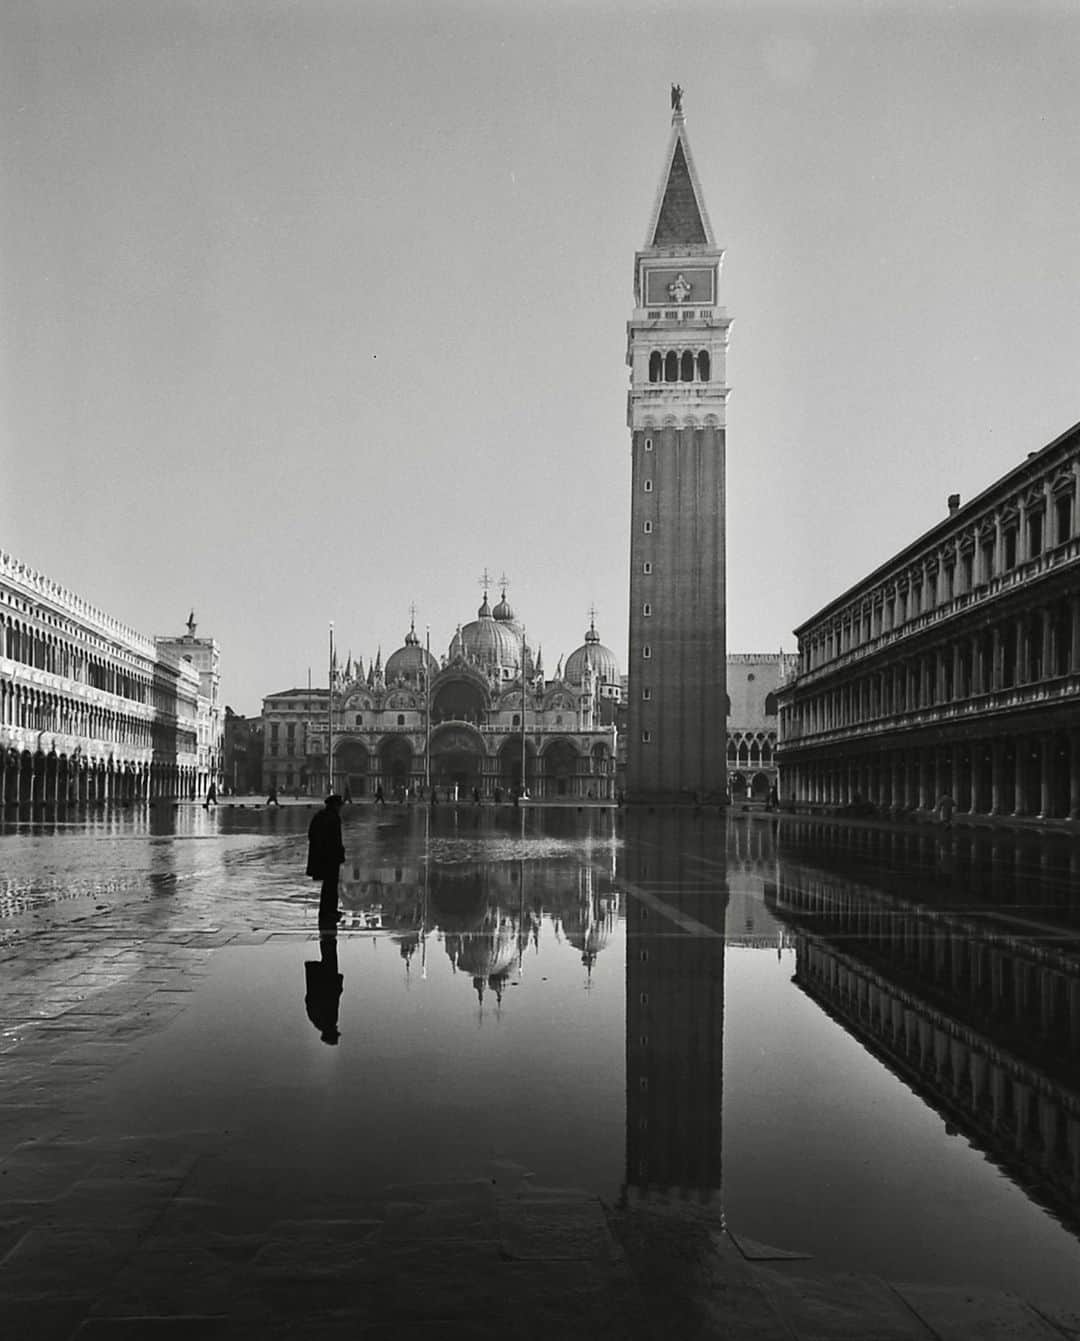 lifeのインスタグラム：「Striking image of a flooded Piazza San Marco in Venice, Italy - 1952.   Visit the link in bio to learn about LIFE photographer Dmitri Kessel. It has been said of Kessel, “he [was] an international human being,” a telling reference to a man who lived well and long, in many places and with many interests. 🌎  (📷 Dmitri Kessel/LIFE Picture Collection)  #LIFEMagazine #LIFEArchive #LIFEPictureCollection #DmitriKessel #1950s #Venice #Italy #PiazzaSanMarco #Travel」